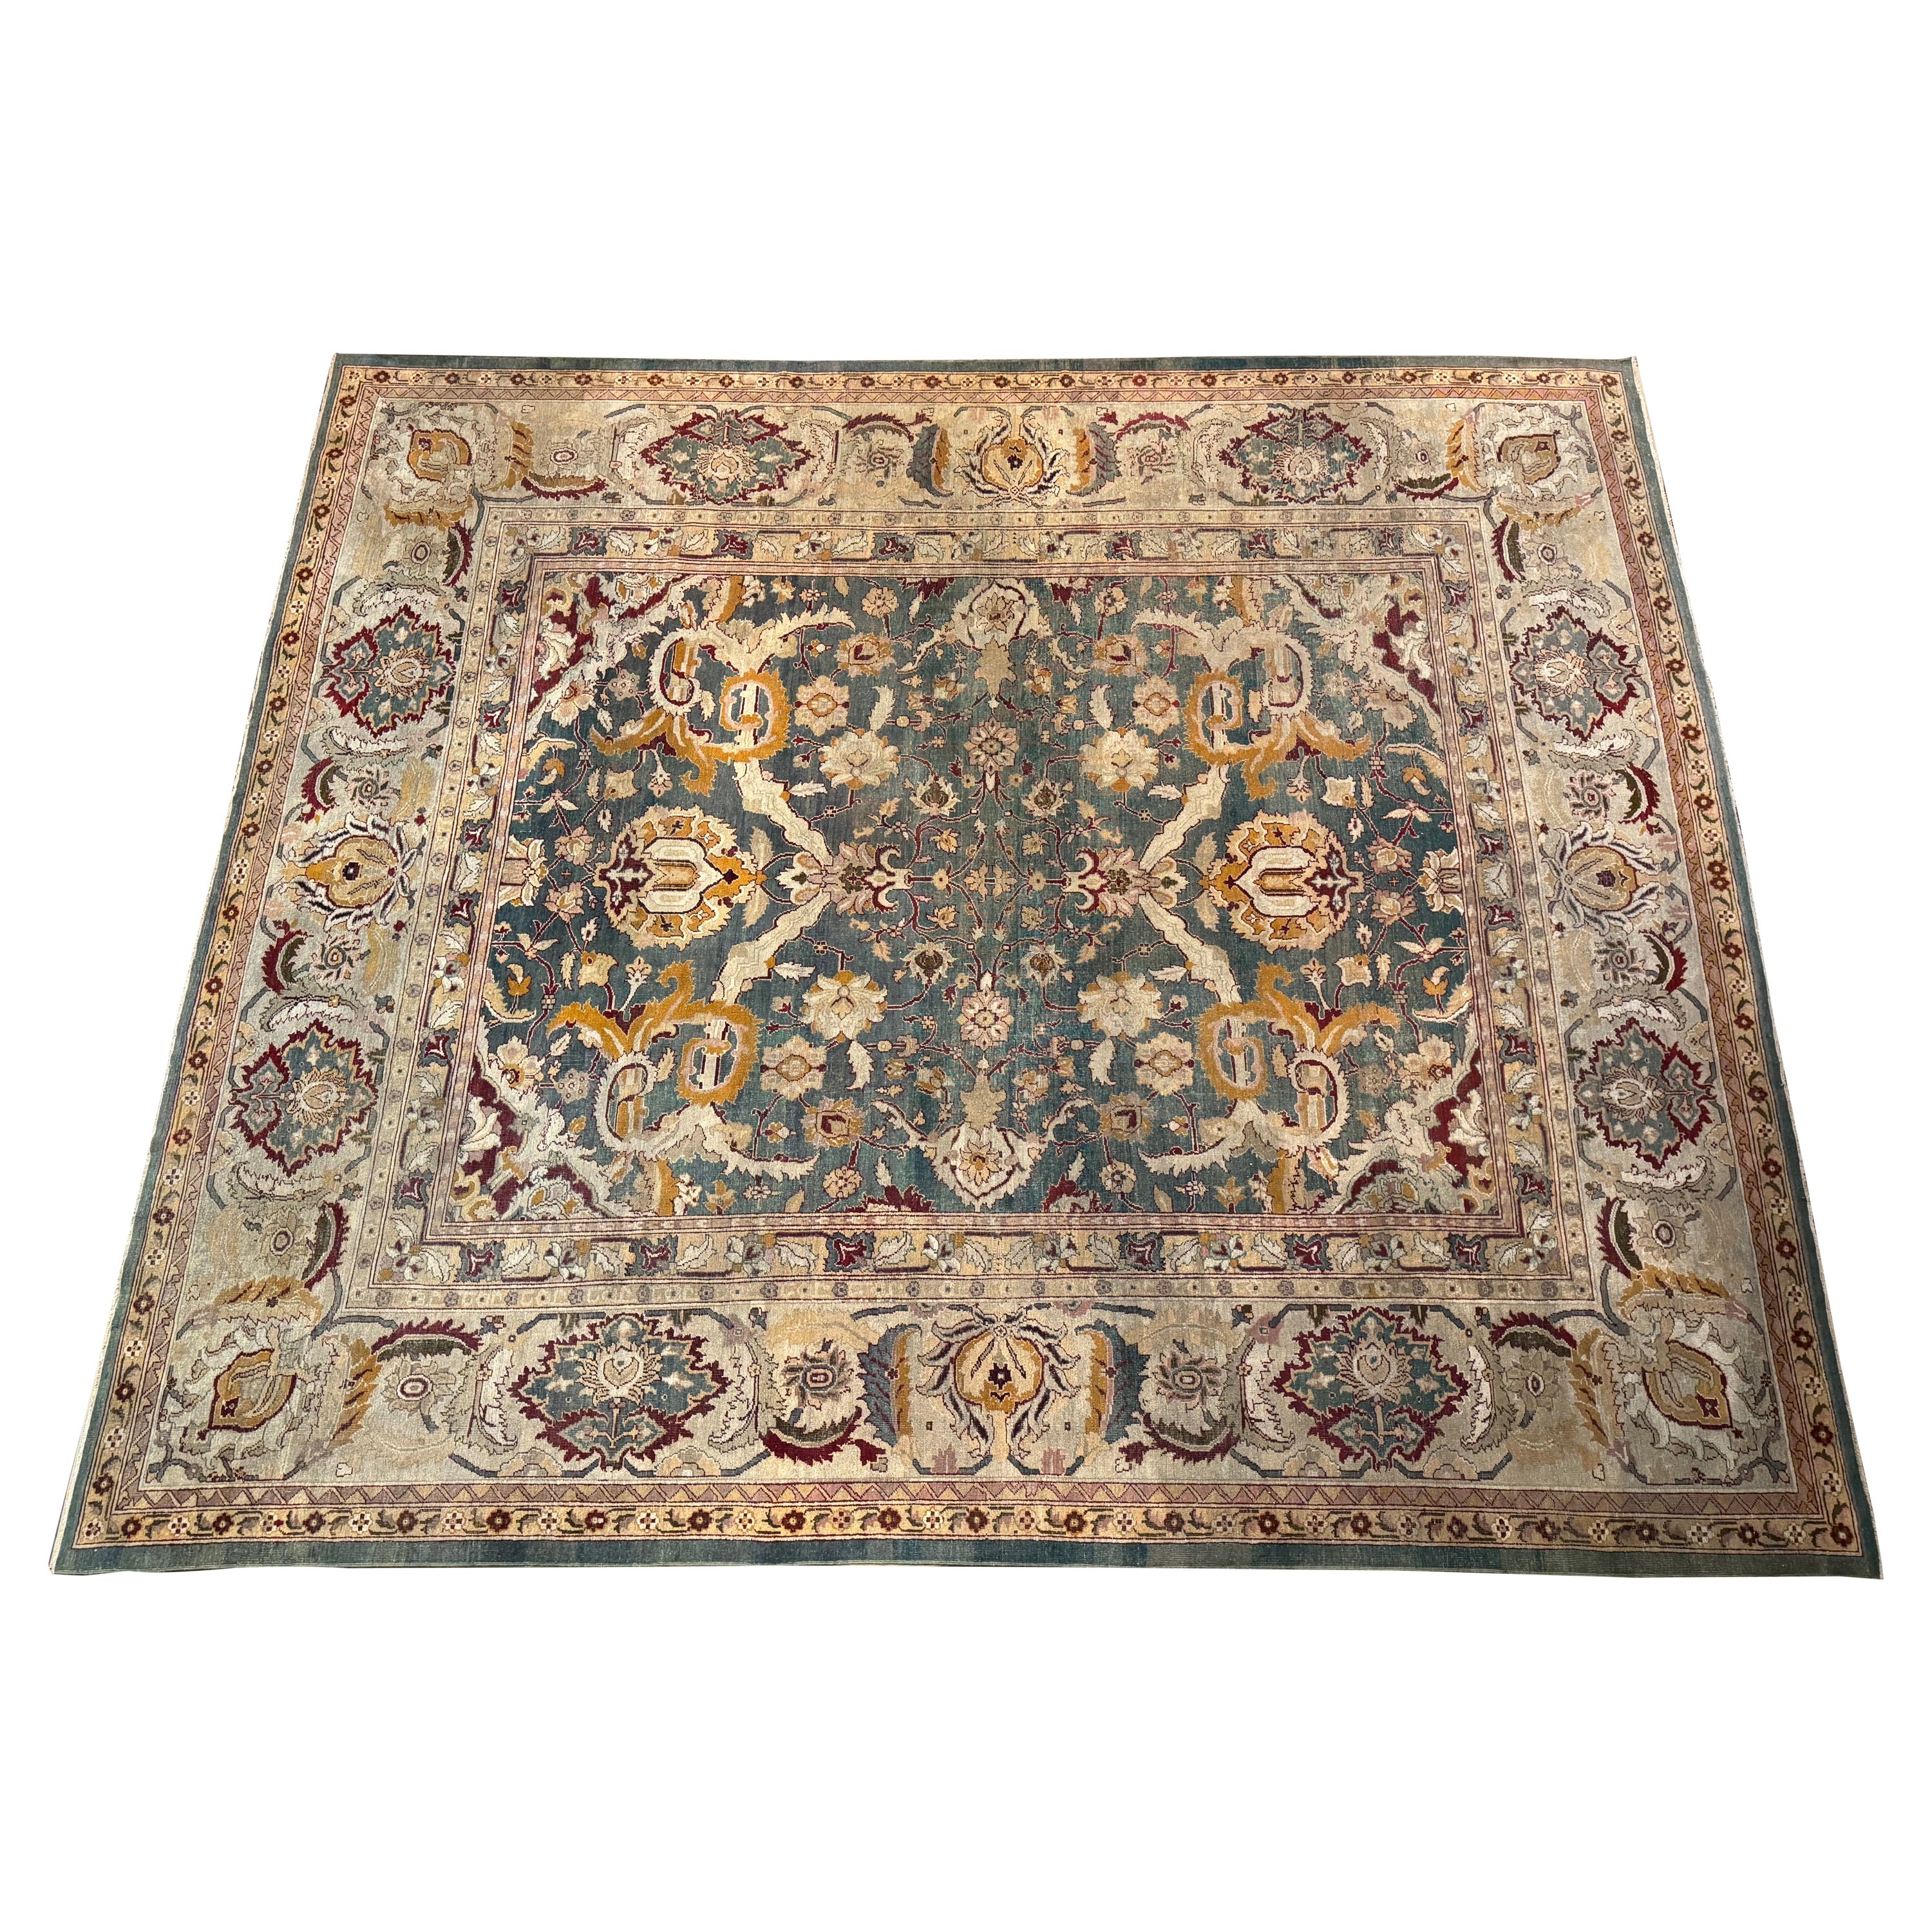 Early 20th Century Indian Hand Woven Wool Agra Rug For Sale